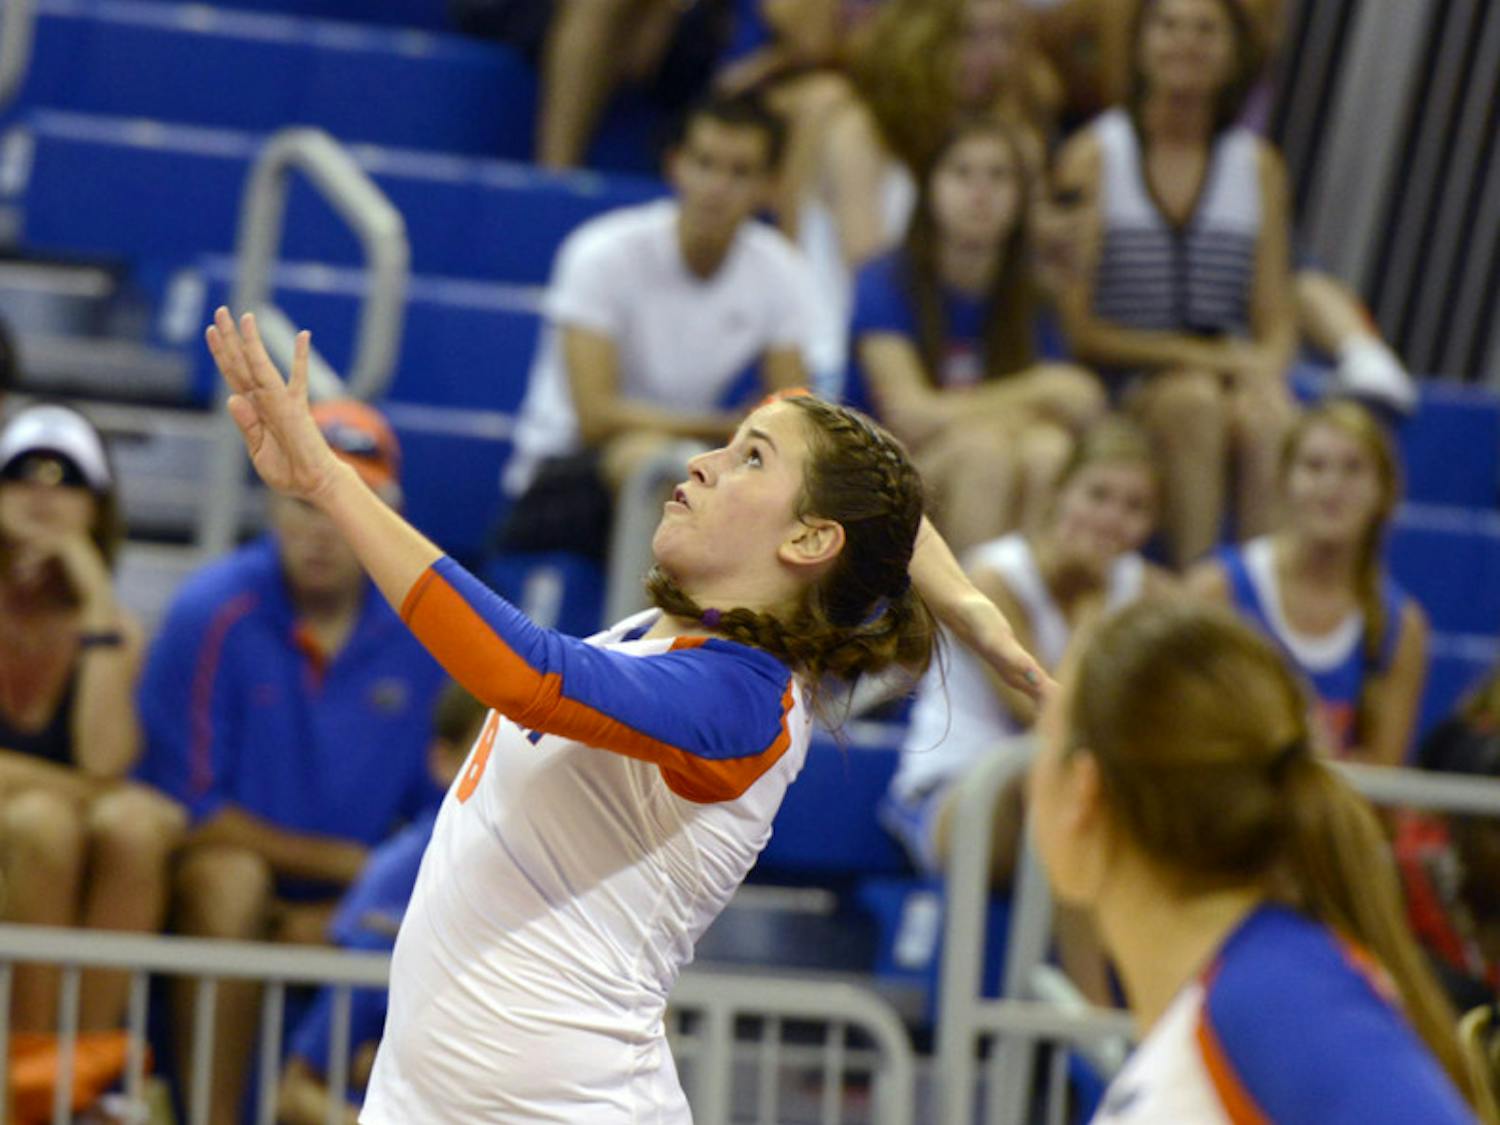 Taylor Brauneis reaches for the ball during Florida’s 3-0 win against Duke on Aug. 31 in the O’Connell Center. Brauneis had 36 assists against UT-SA on Thursday.